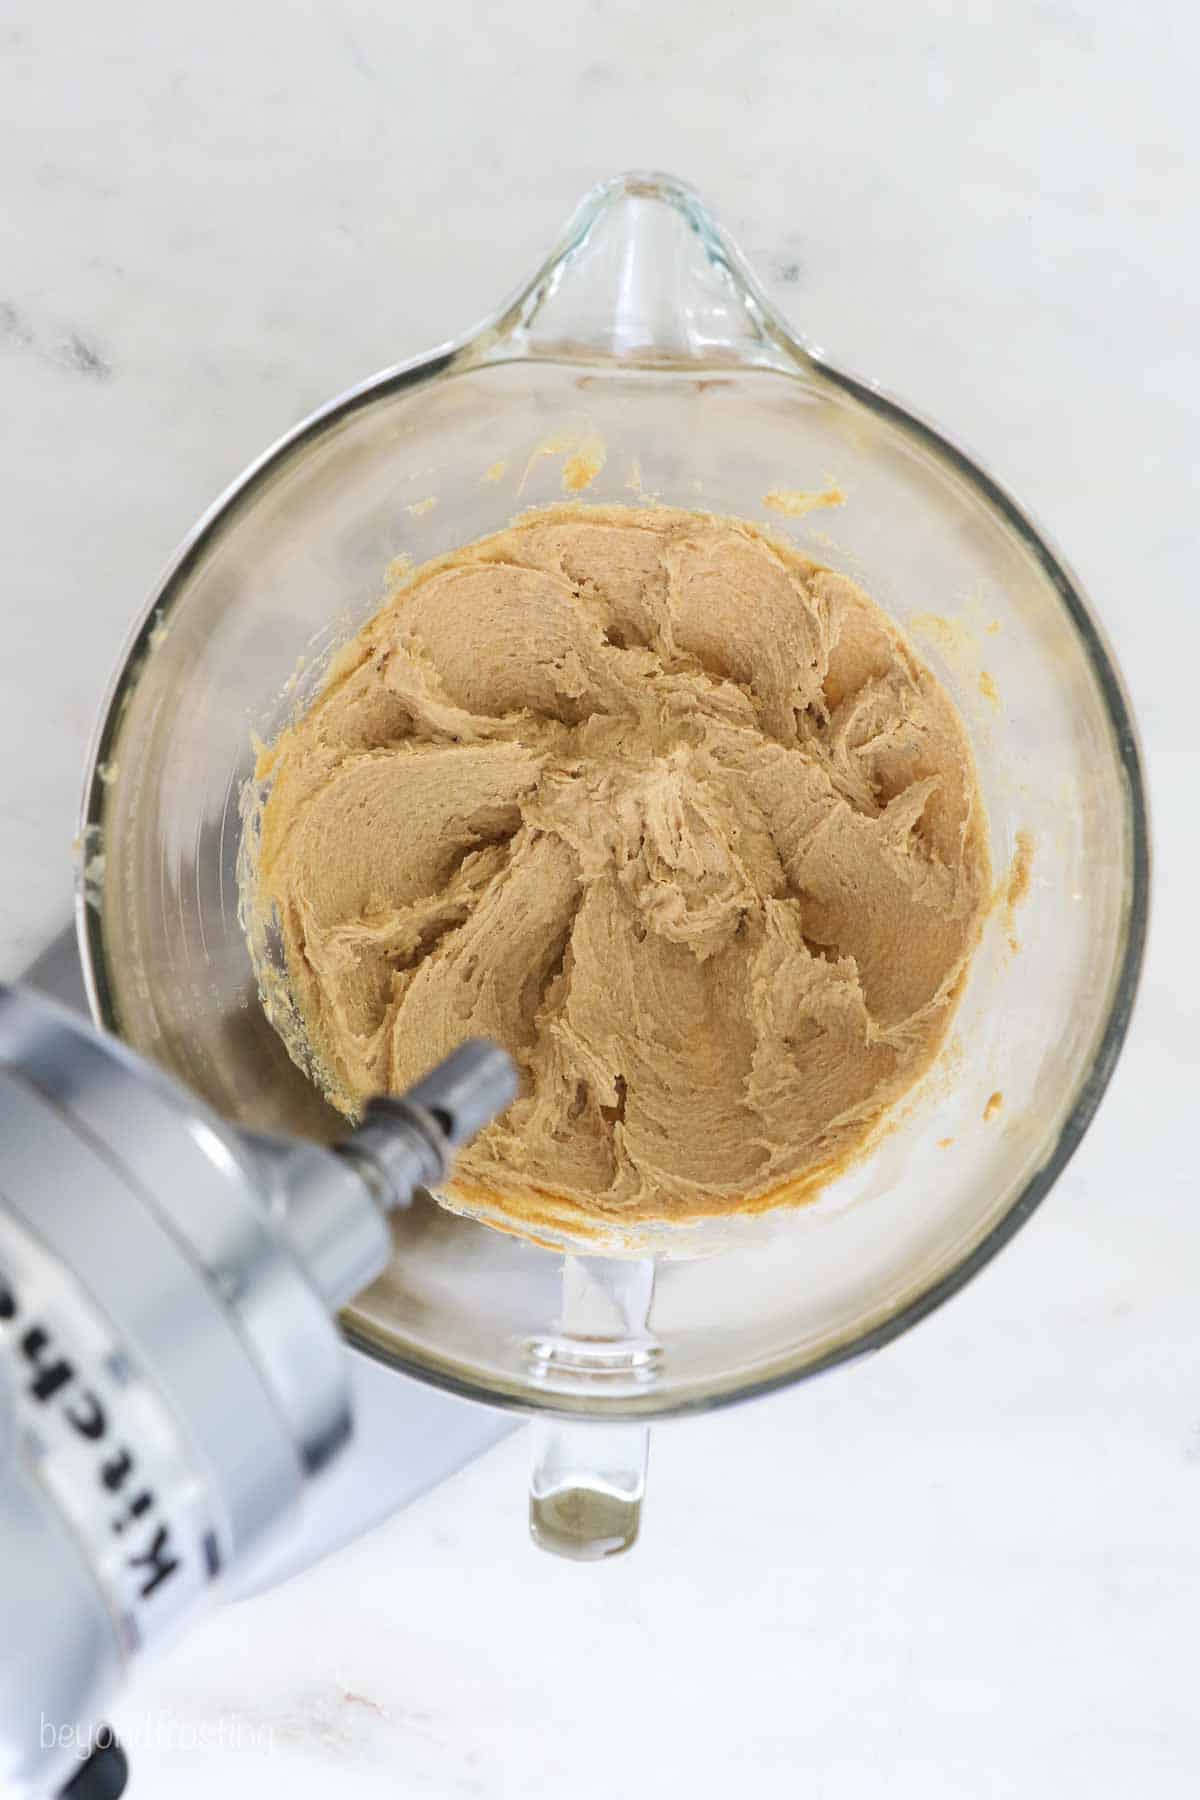 A mixing bowl showing the peanut butter and butter being mixed together.